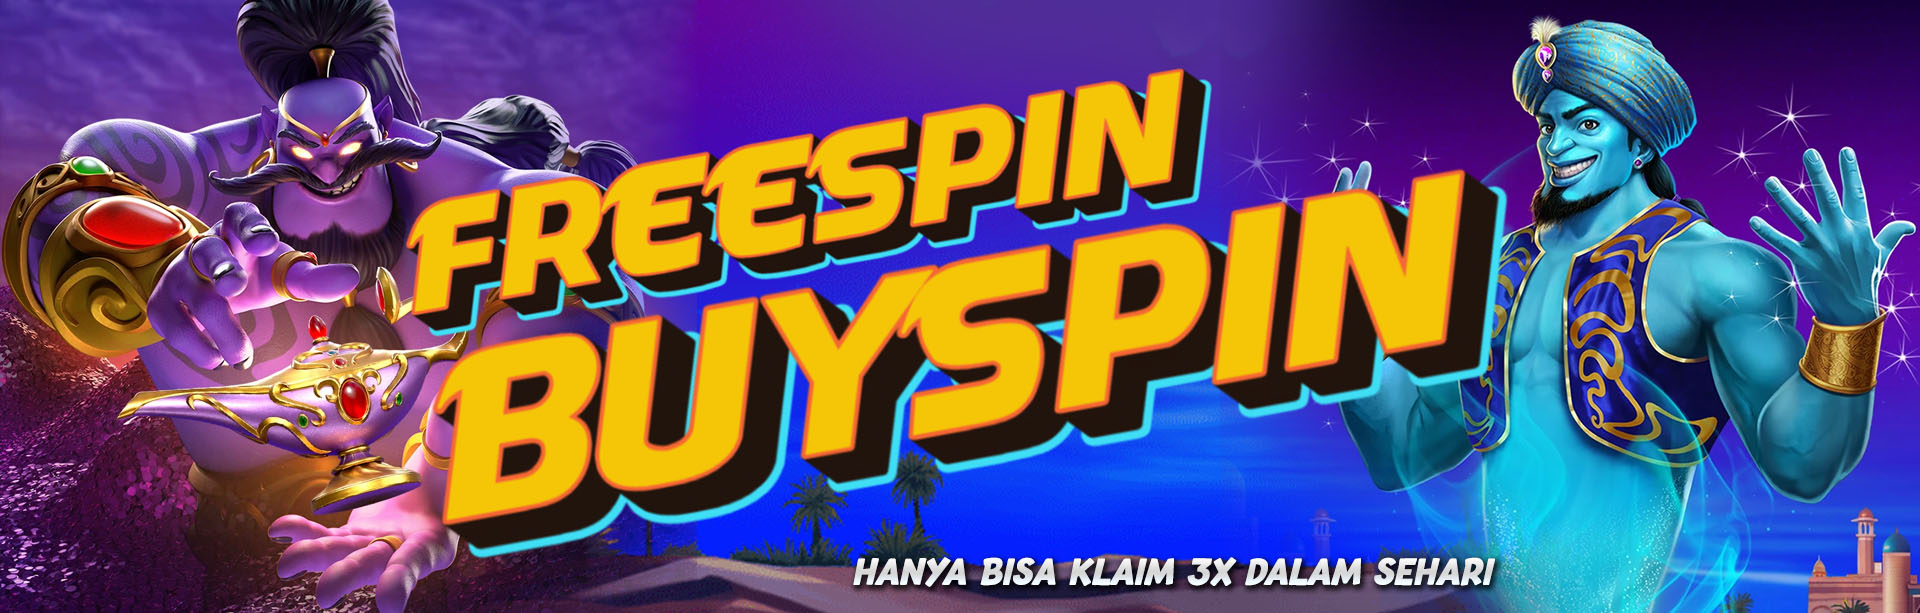 SPECIAL EVENT FREESPIN | BUYSPIN